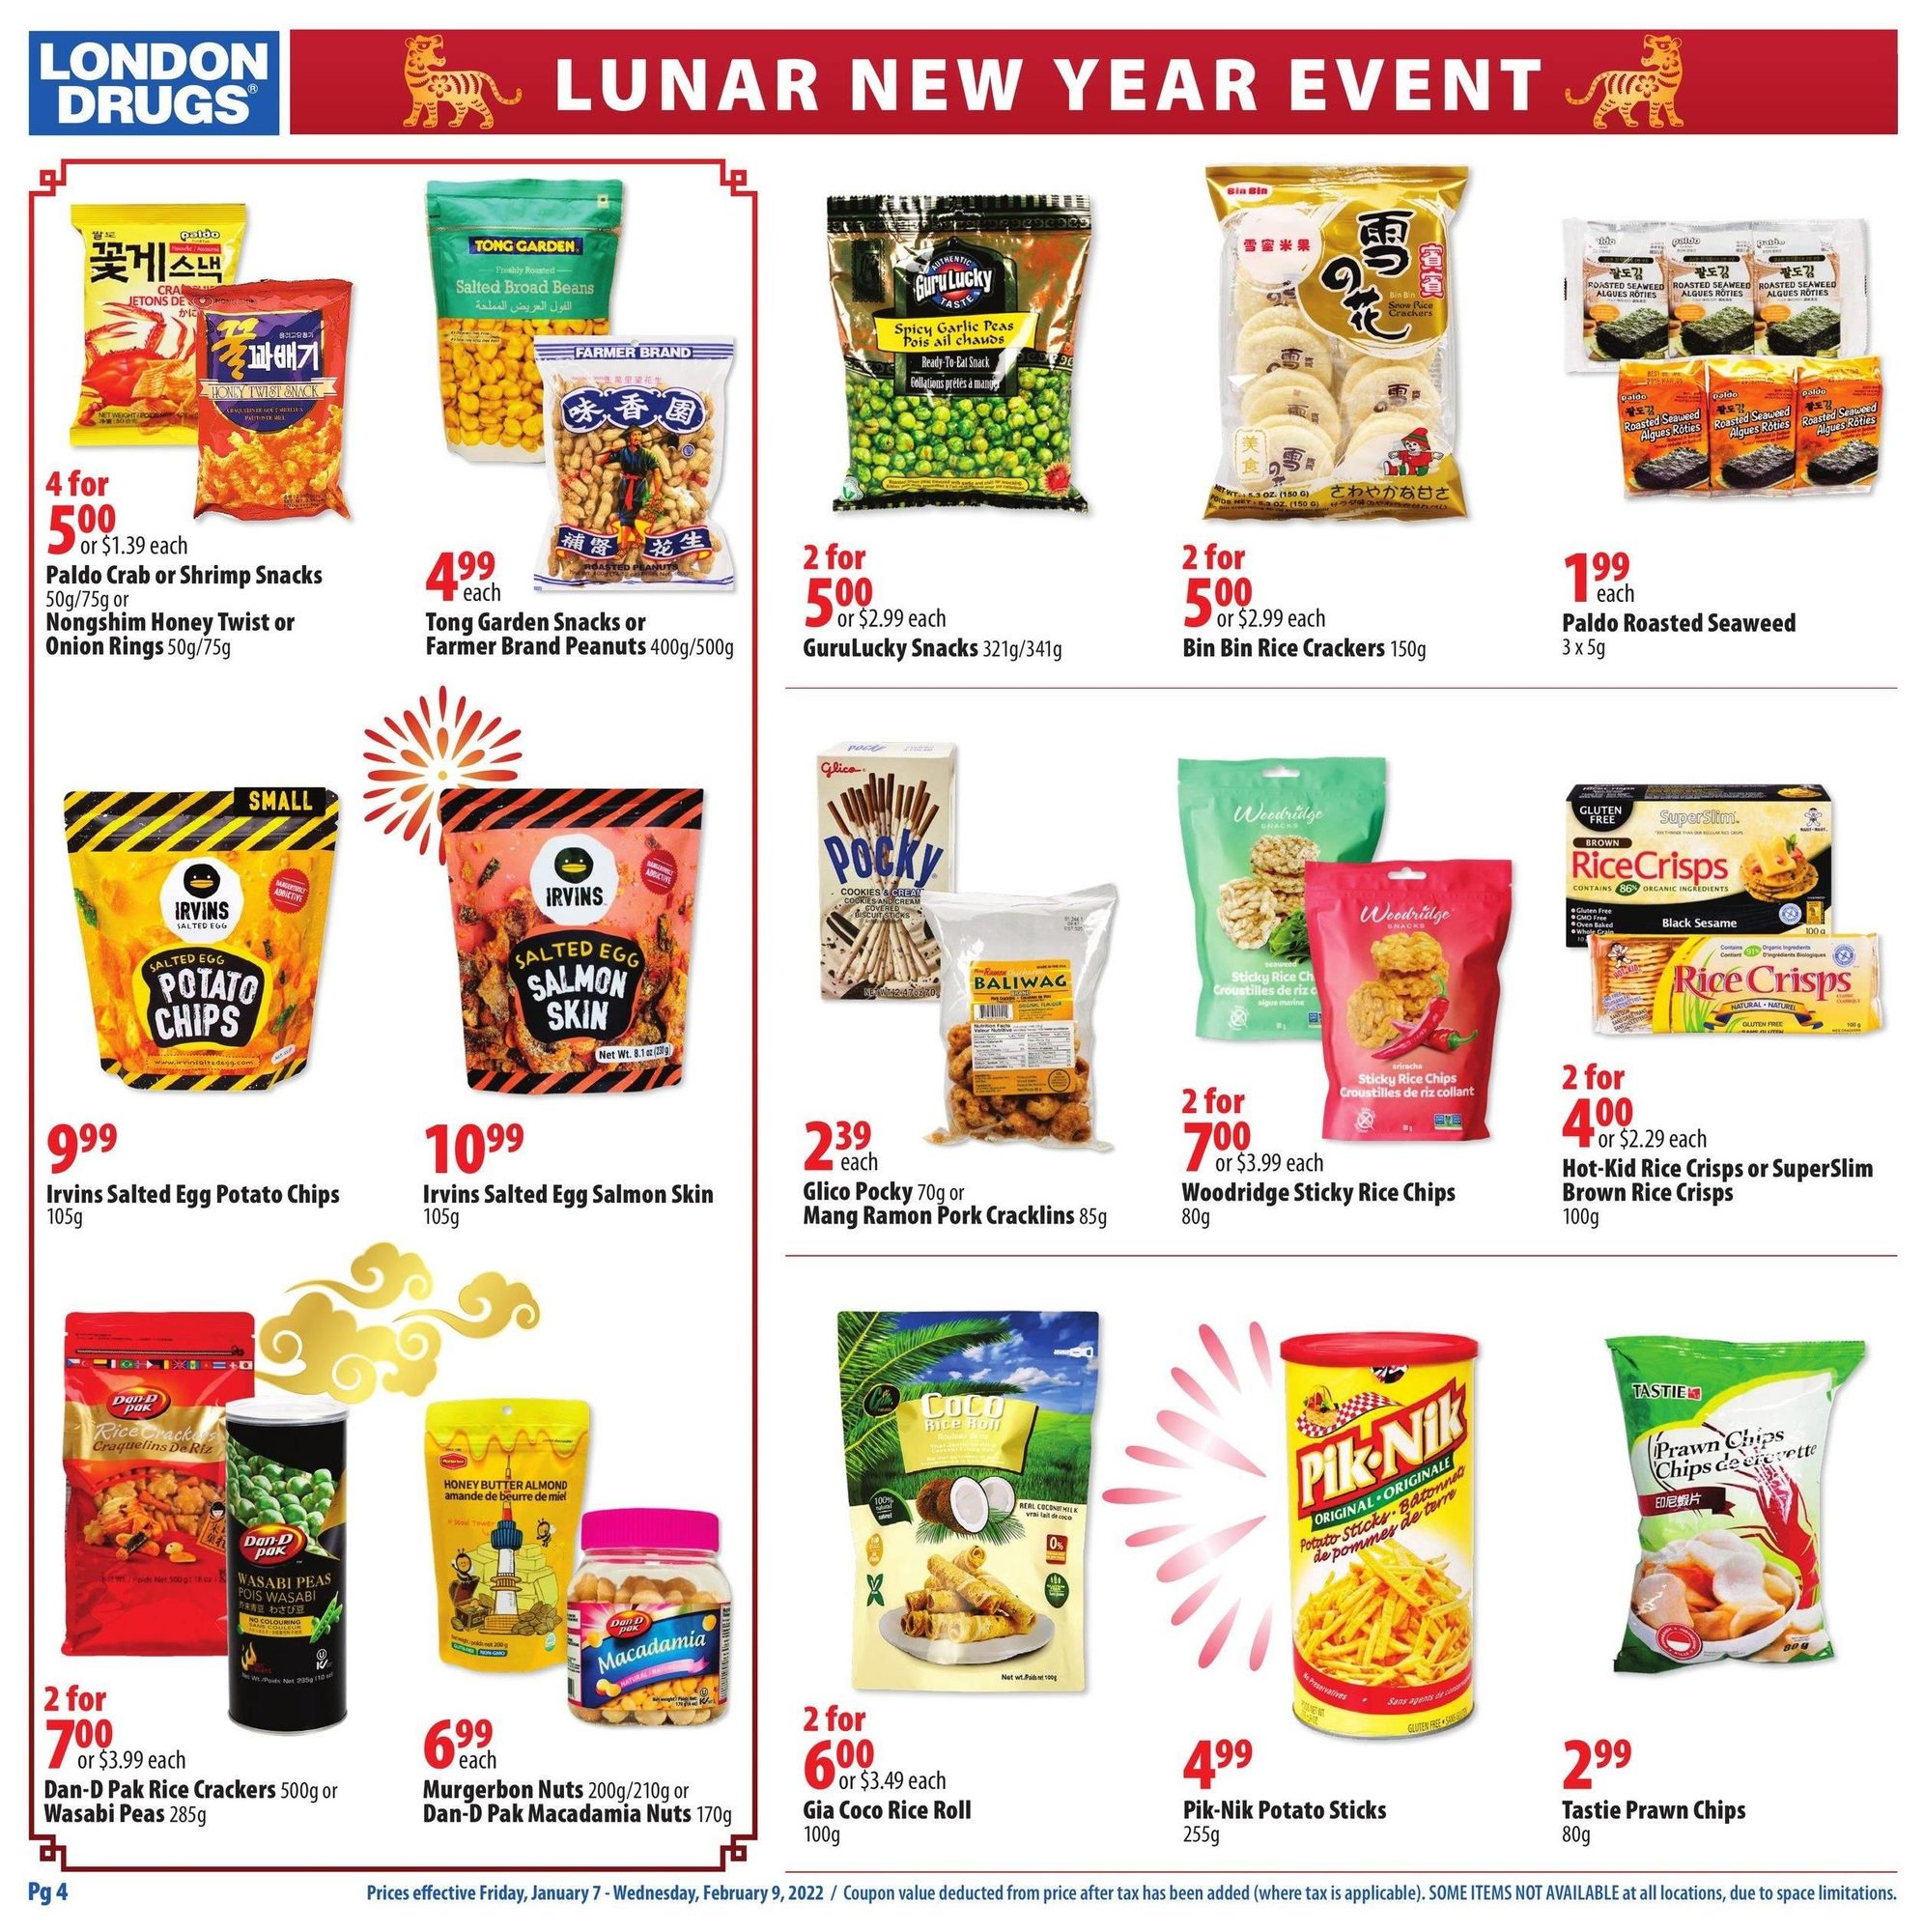 London Drugs - Lunar New Year Event - Page 4